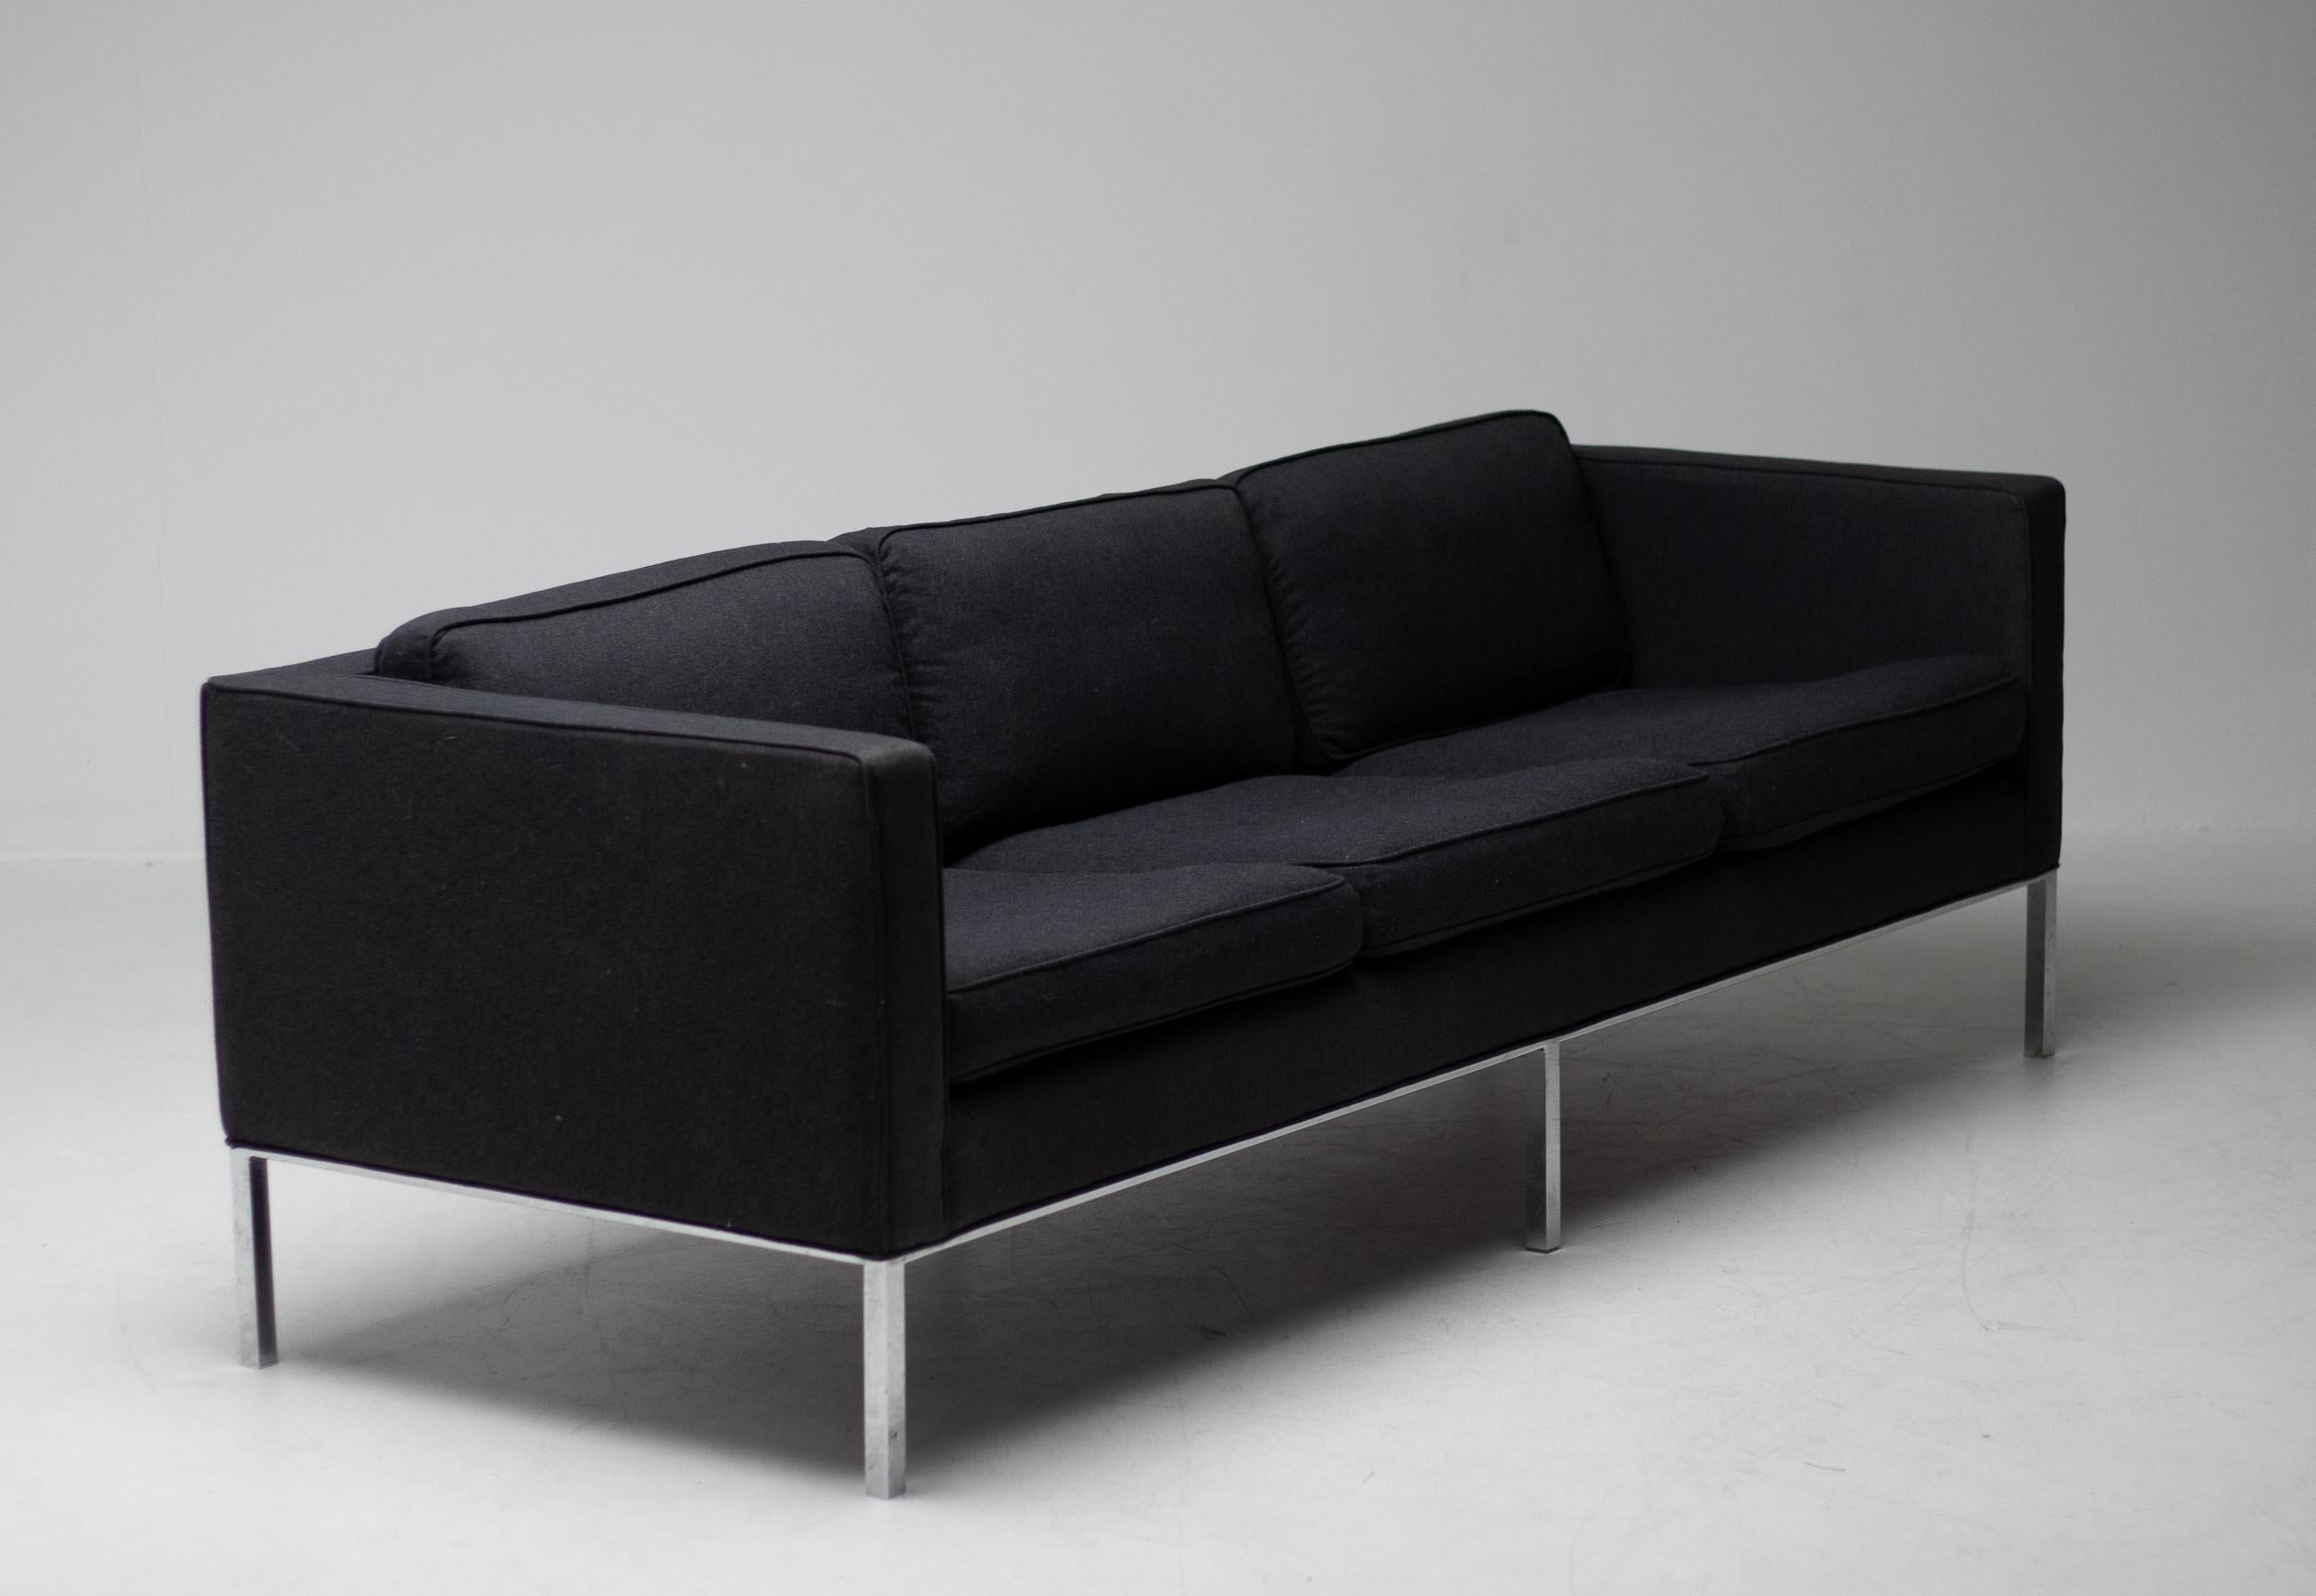 Artifort 905 3-seater sofa by the Artifort design team lead by Kho Lian Ie, 1964.
Upholstered in a dark grey woolen fabric by De Ploeg that is not damaged but slightly worn and stained.
Reupholstery recommended.
